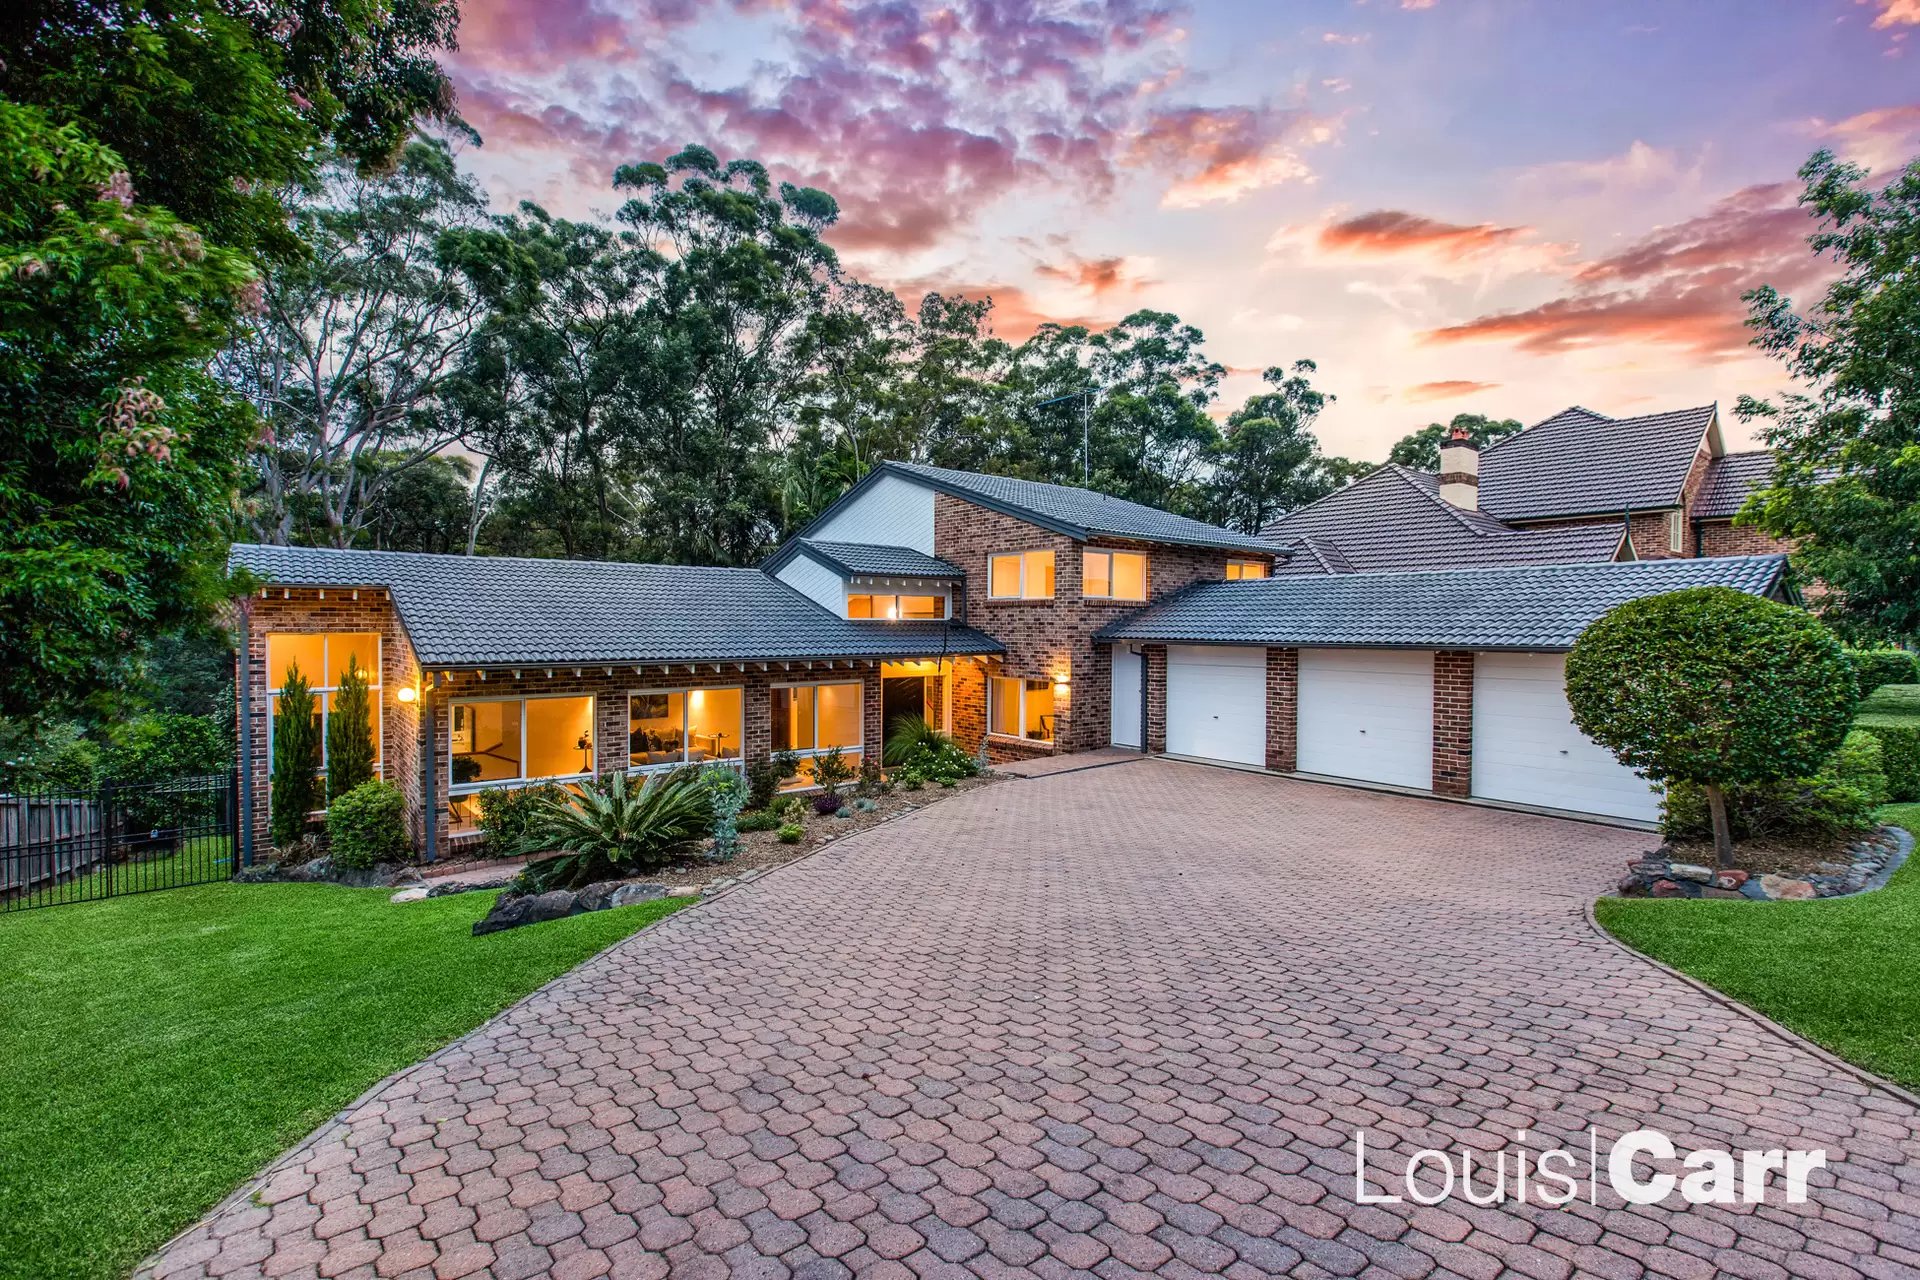 Photo #1: 78 Alana Drive, West Pennant Hills - For Sale by Louis Carr Real Estate